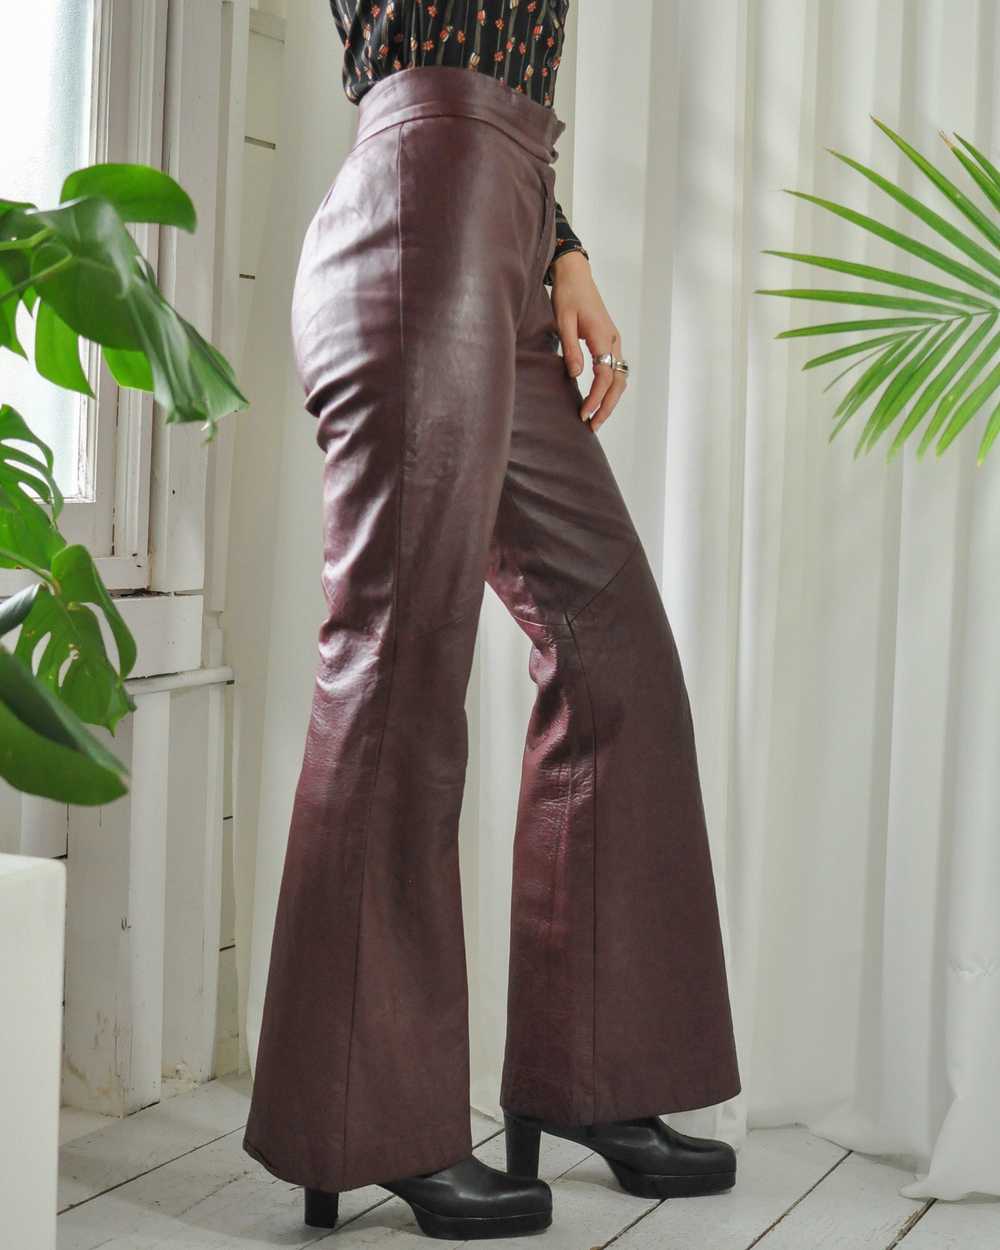 70s Burgundy Leather Pant Suit - image 7